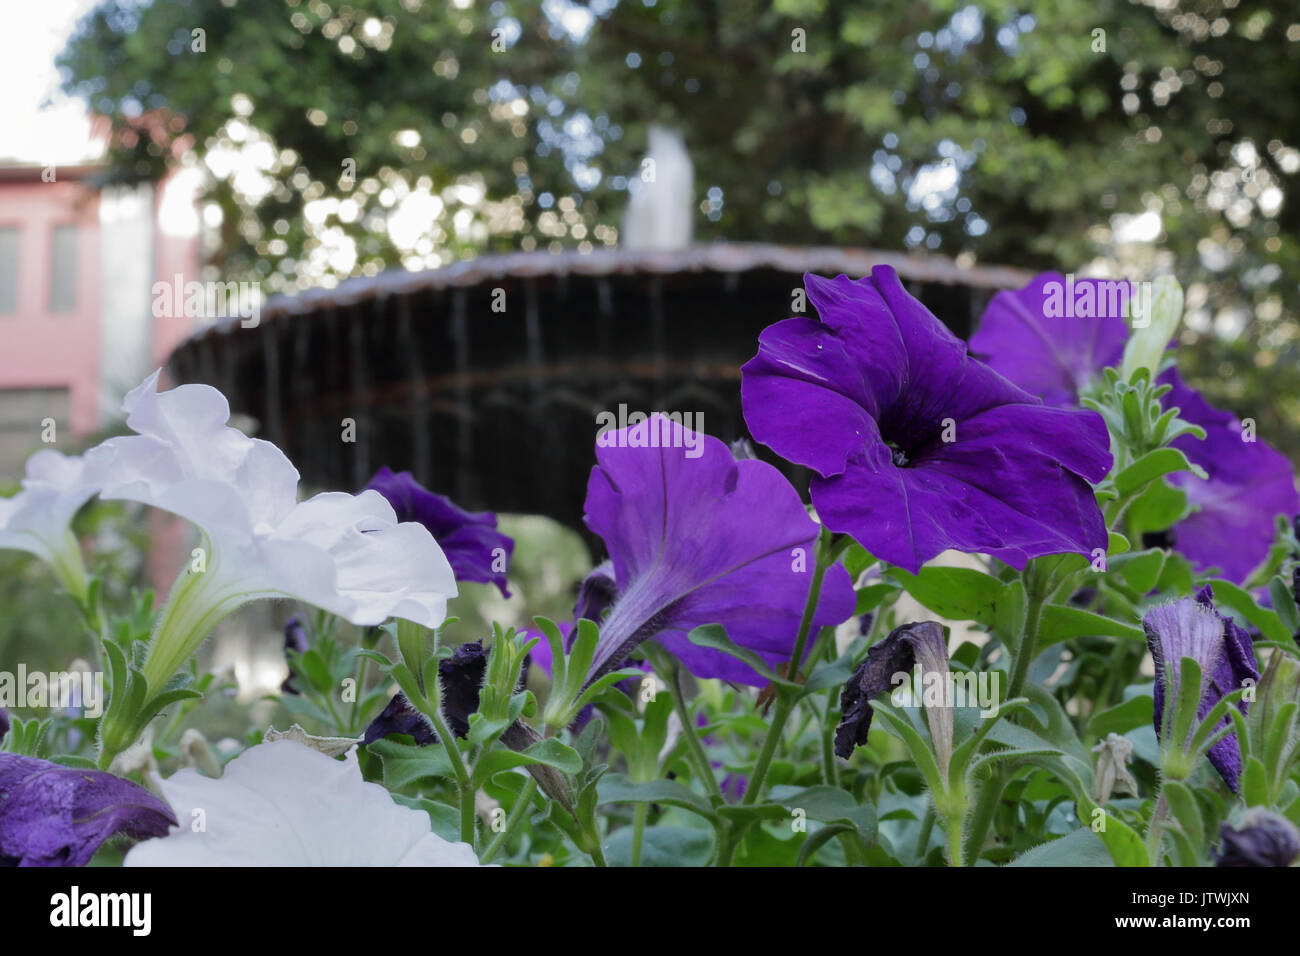 White and violet flowers with a round fountain with falling water on the background, in Plaza del Principe park, in Tenerife Stock Photo